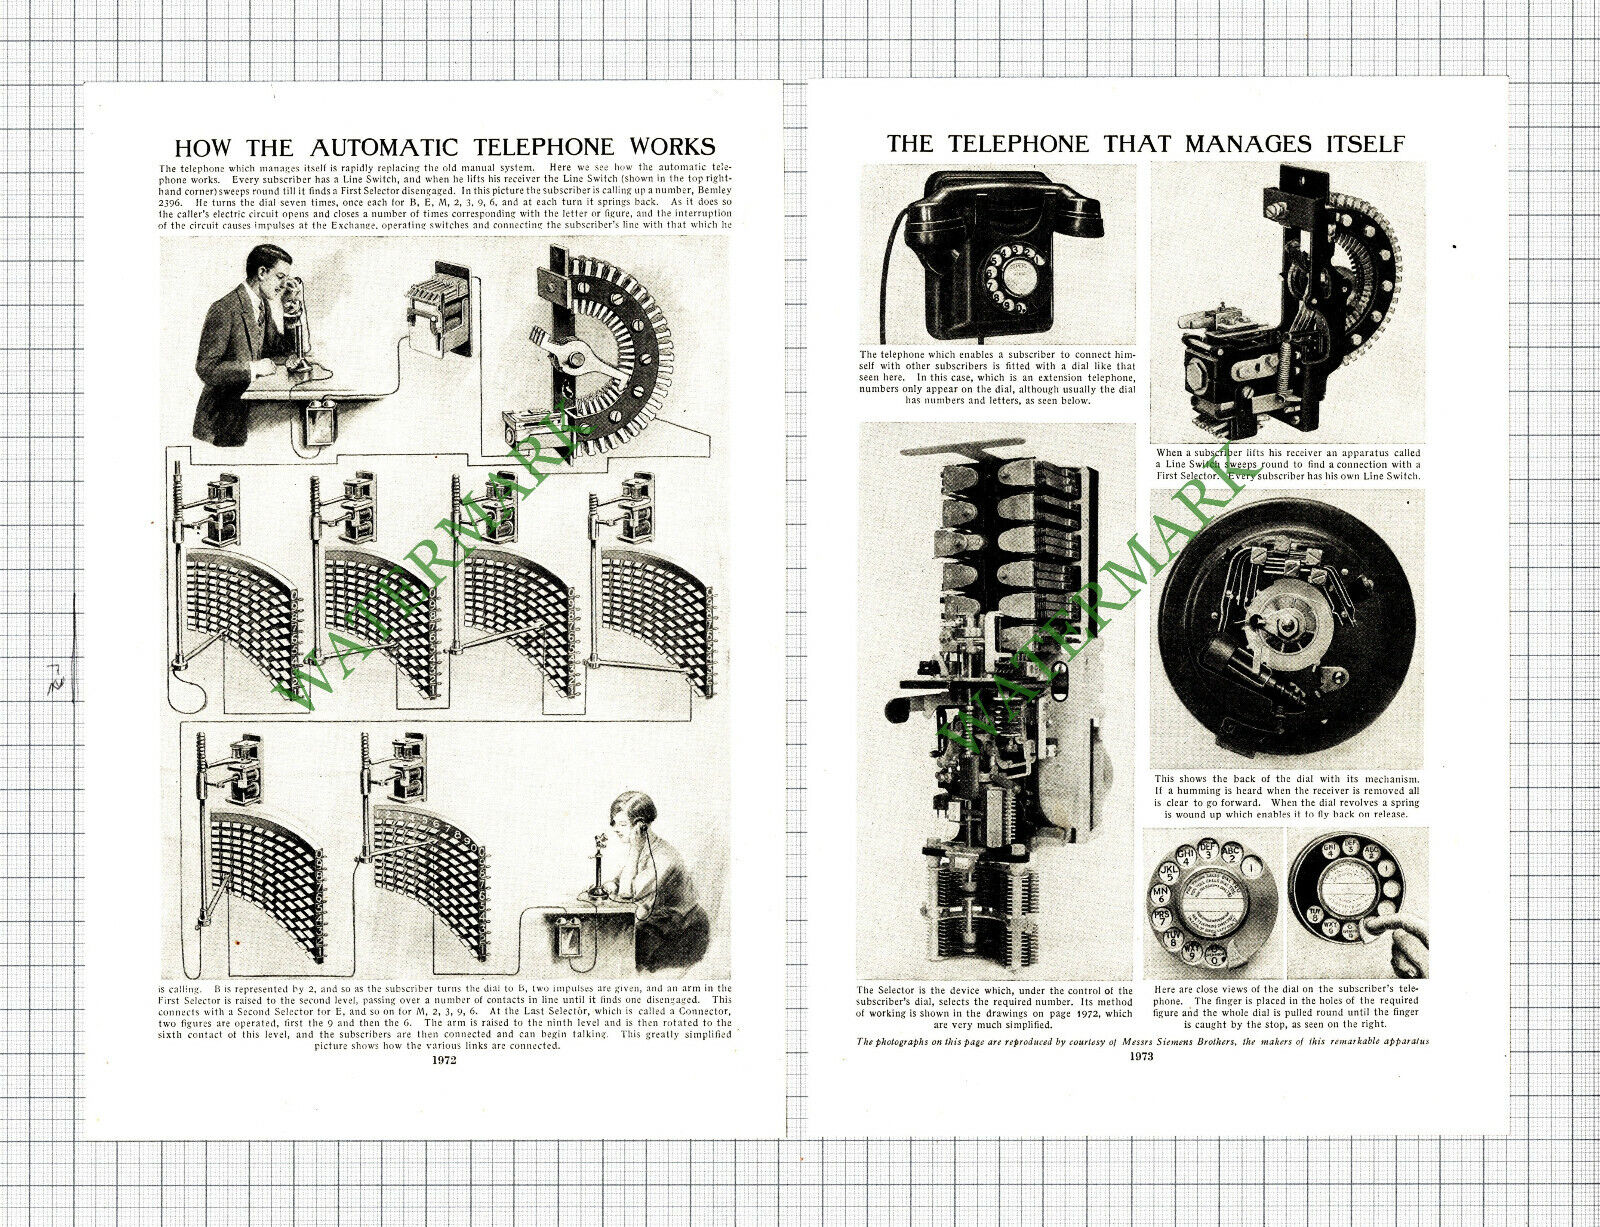 How A Telephone Works Siemens Brothers  - c.1950 2-Part  Cutting / Print